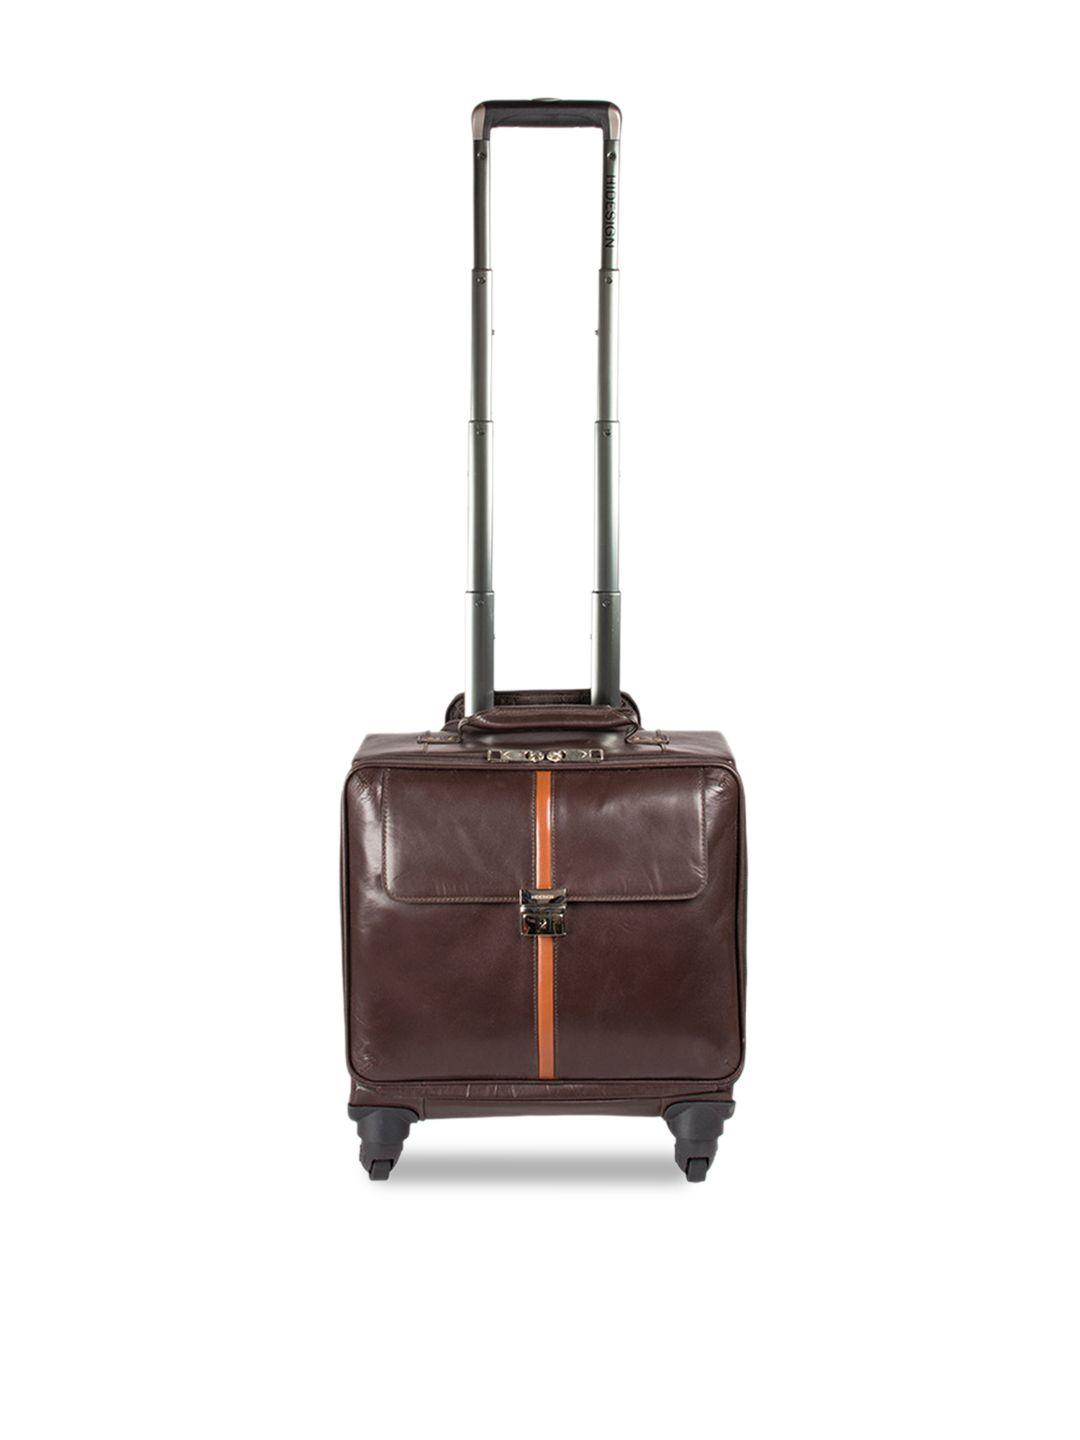 hidesign-unisex-brown-solid-cabin-trolley-suitcase